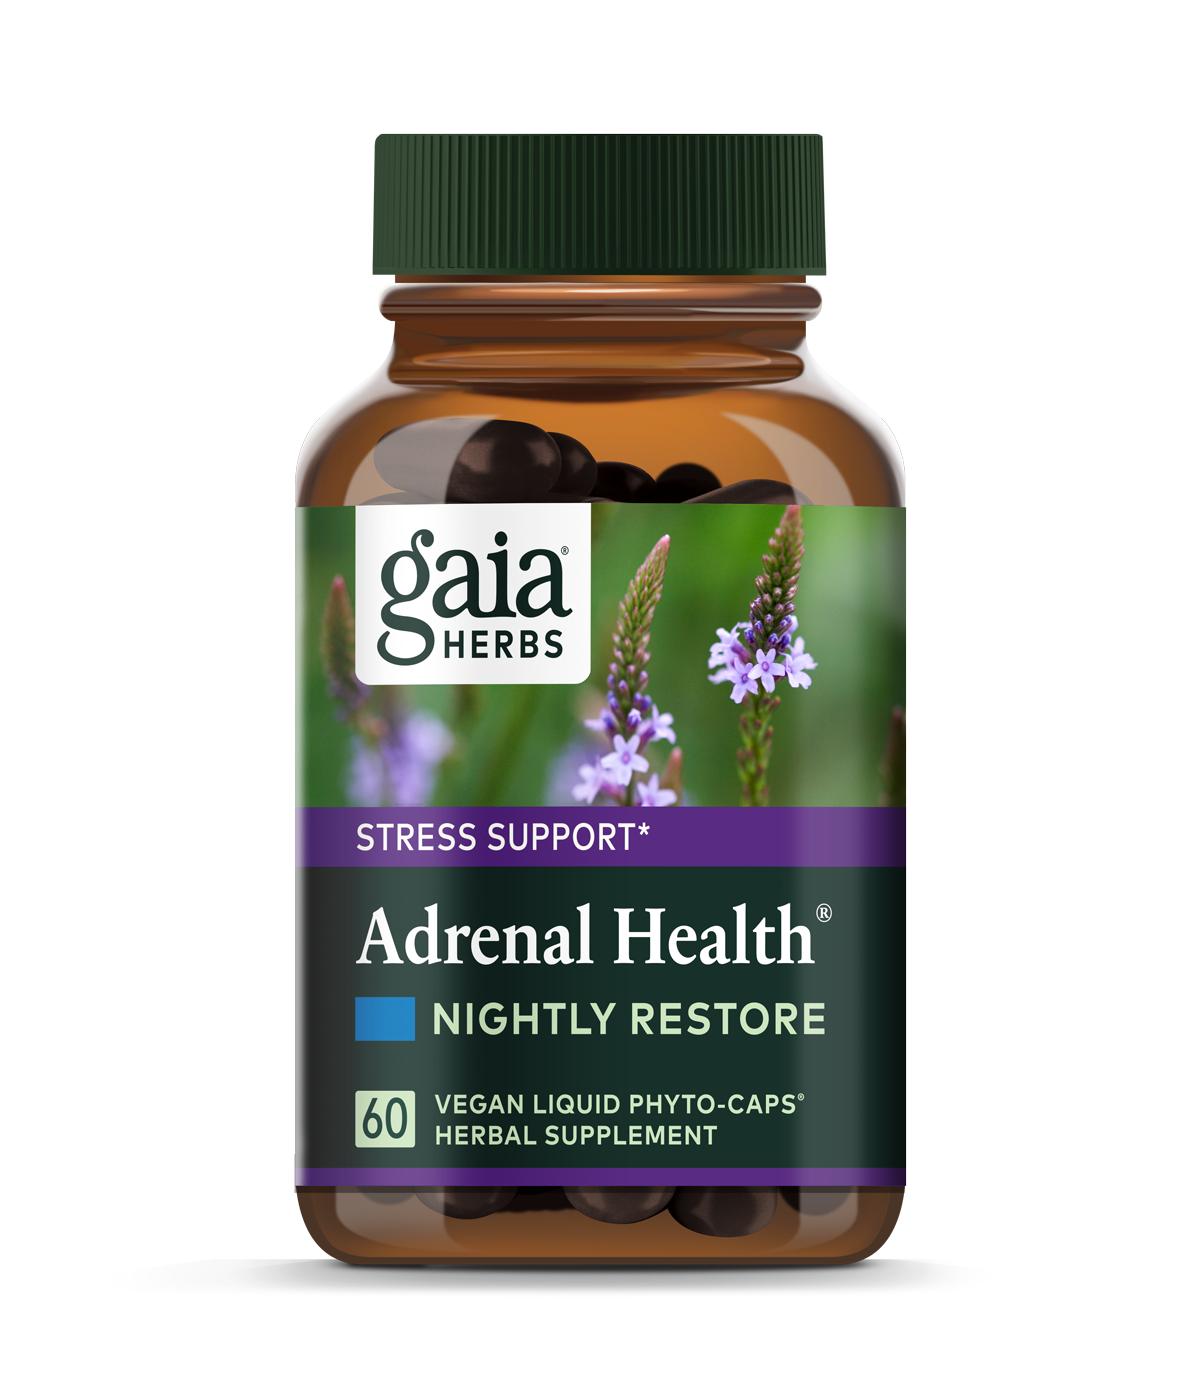 Gaia Herbs Adrenal Health Nightly Restore; image 1 of 2